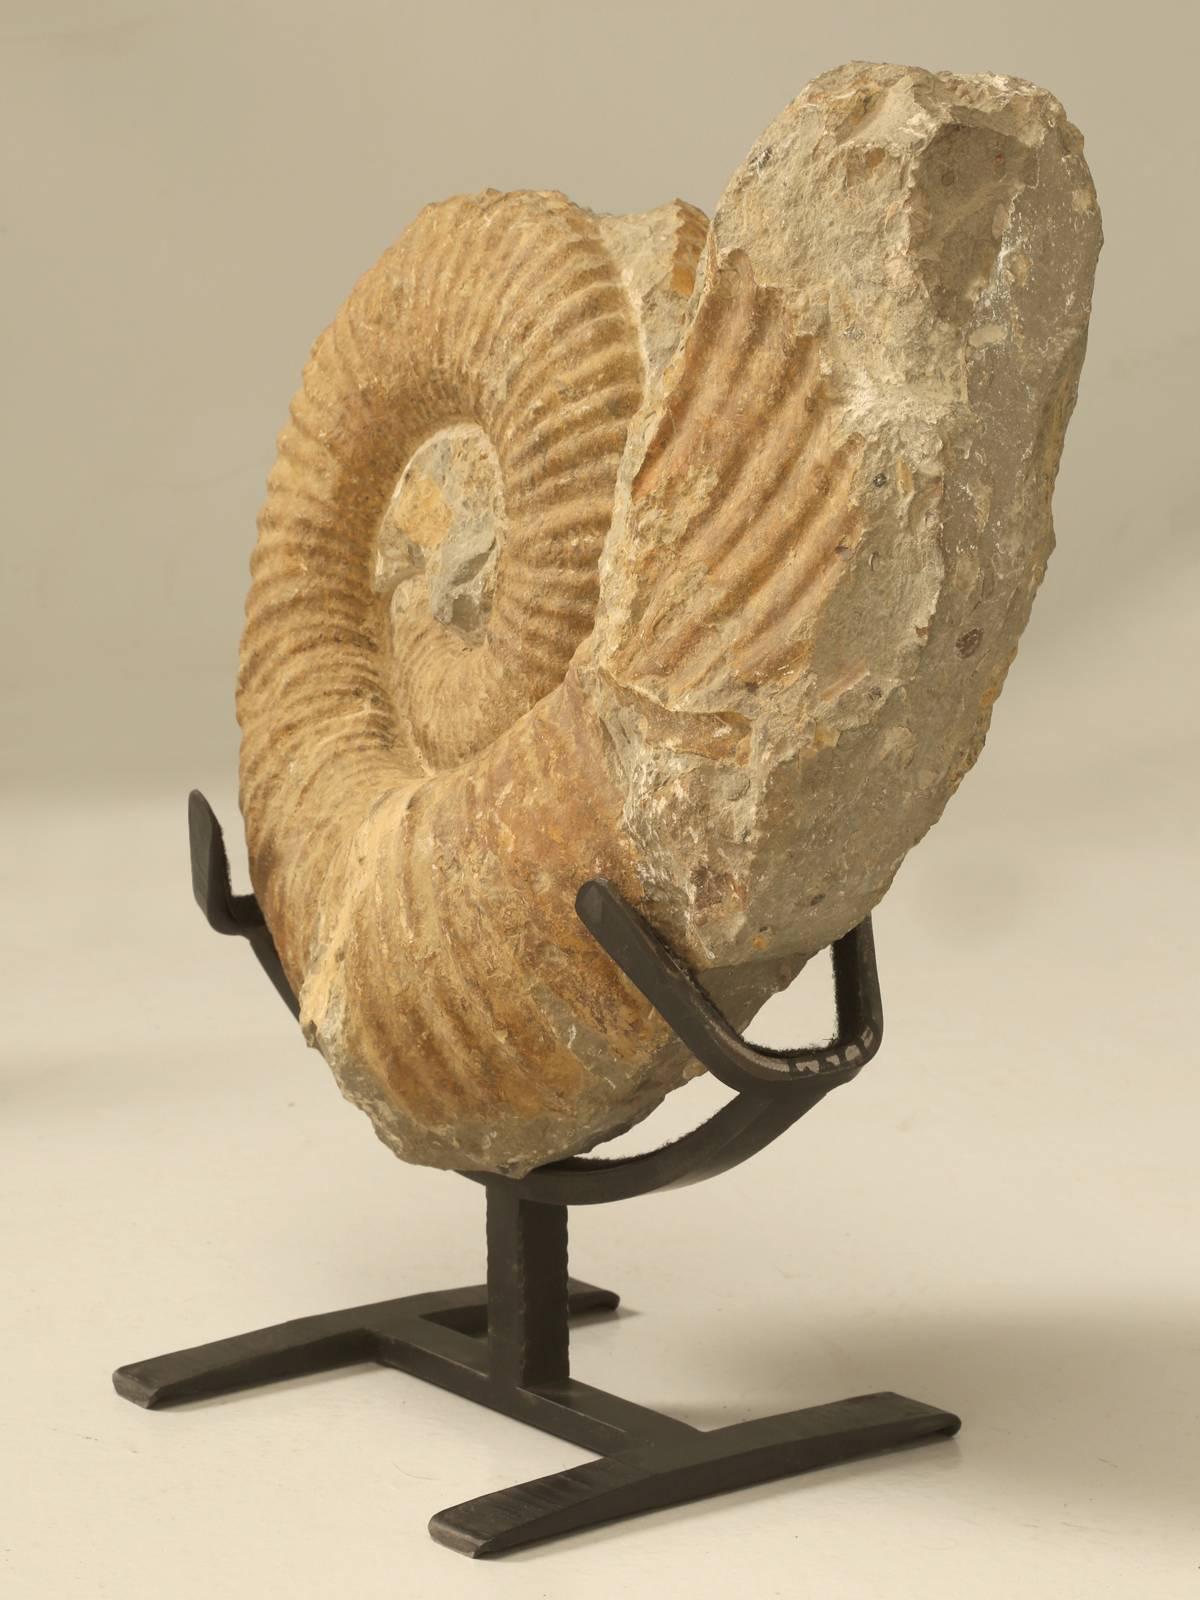 Prehistoric Ammonite Fossil from Morocco